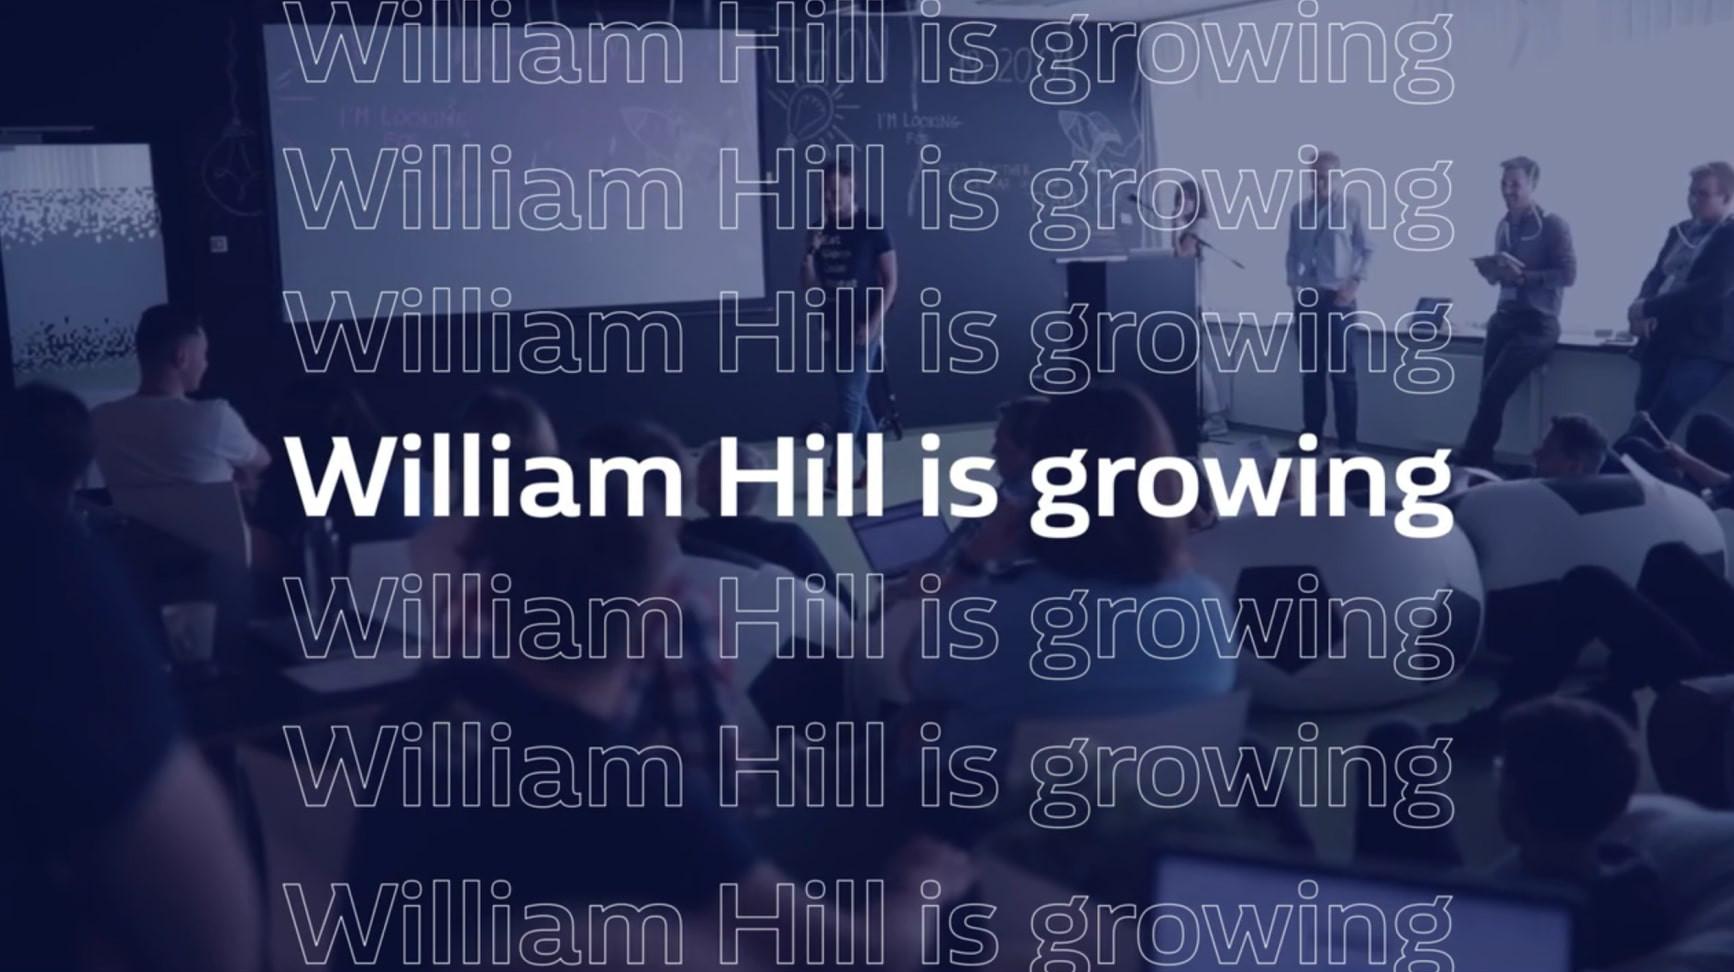 Placeholder for william hill video